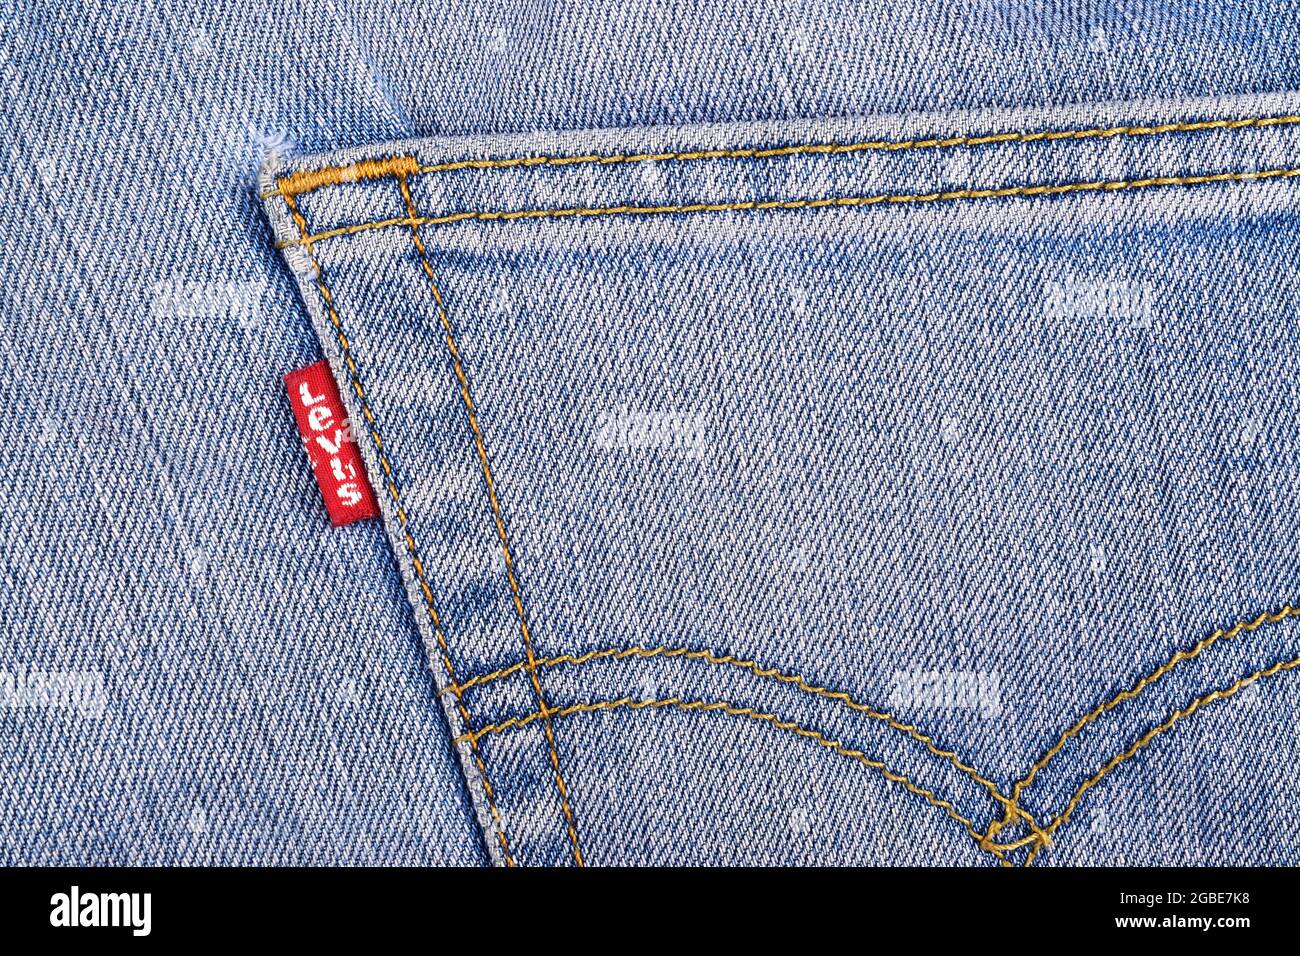 India, new Delhi - 16 Oct 2018: Close up of the LEVI'S red label on the back pocket of denim jeans. Stock Photo